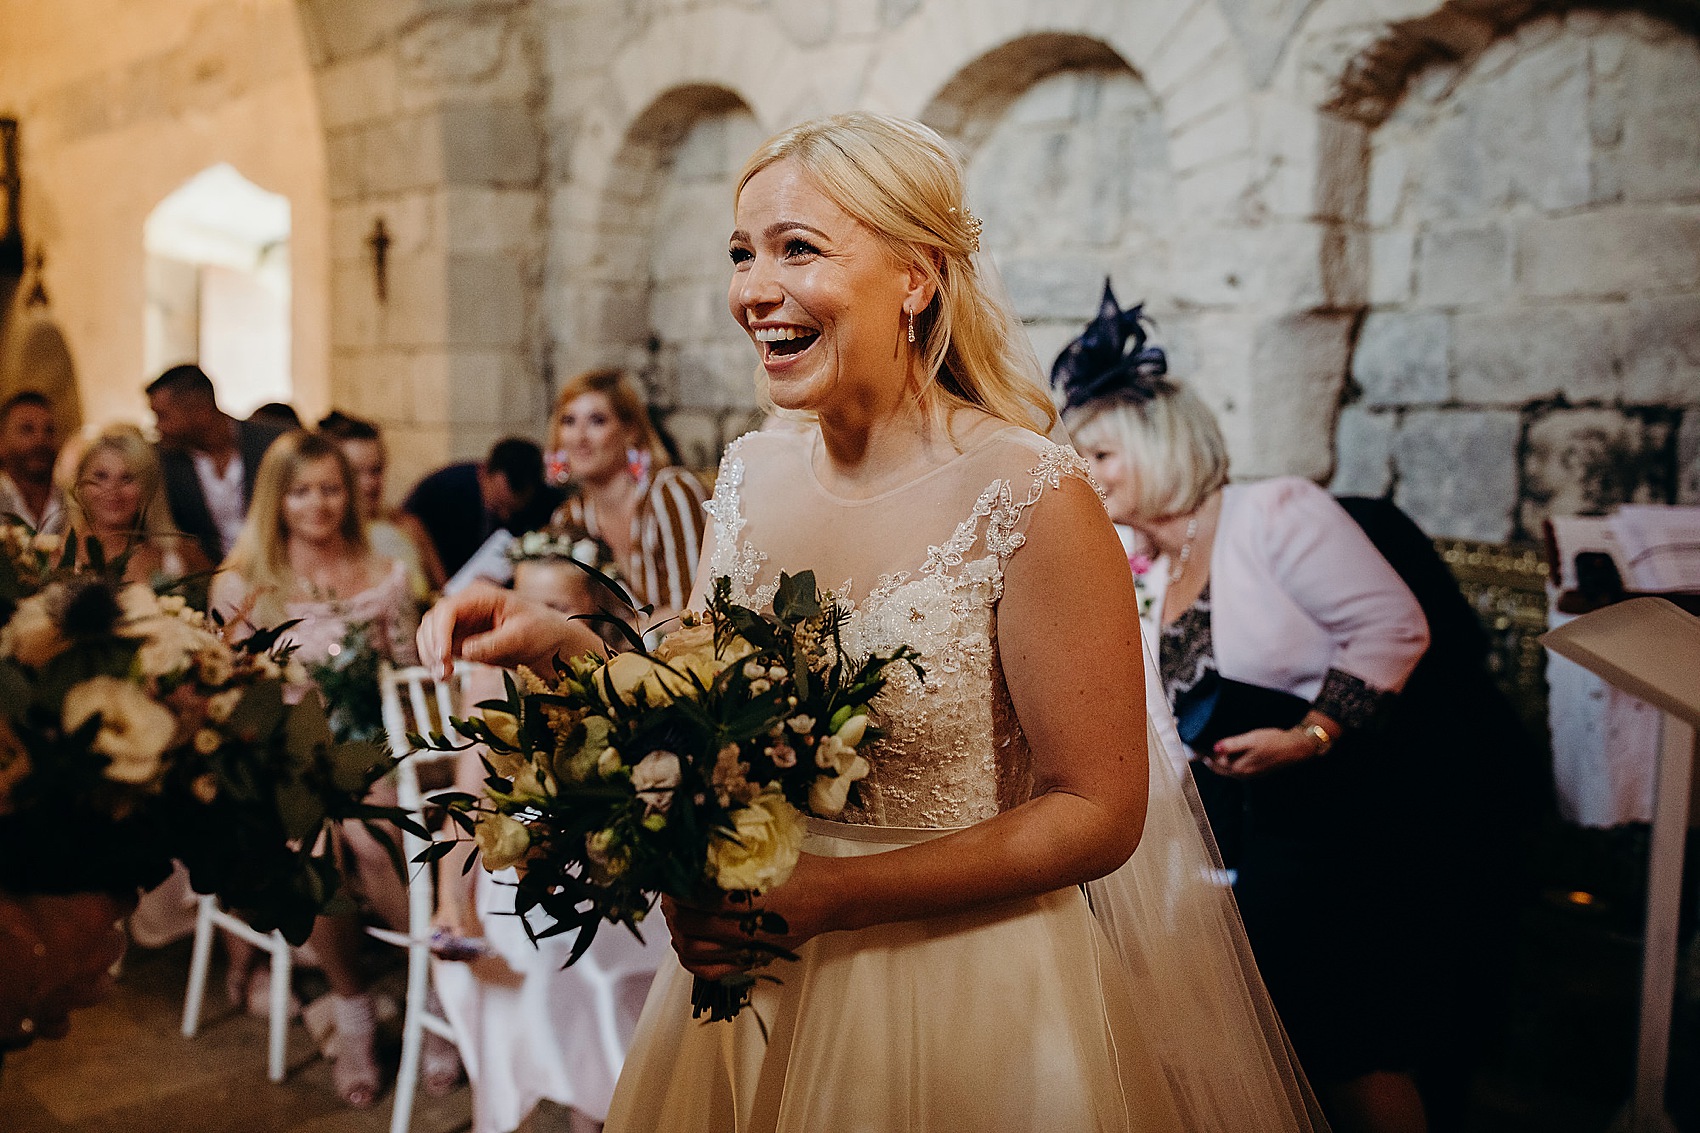 https://www.lovemydress.net/wp-content/uploads/2020/06/Two-brides-Sassi-Holford-French-Chateau-Wedding-24.jpg